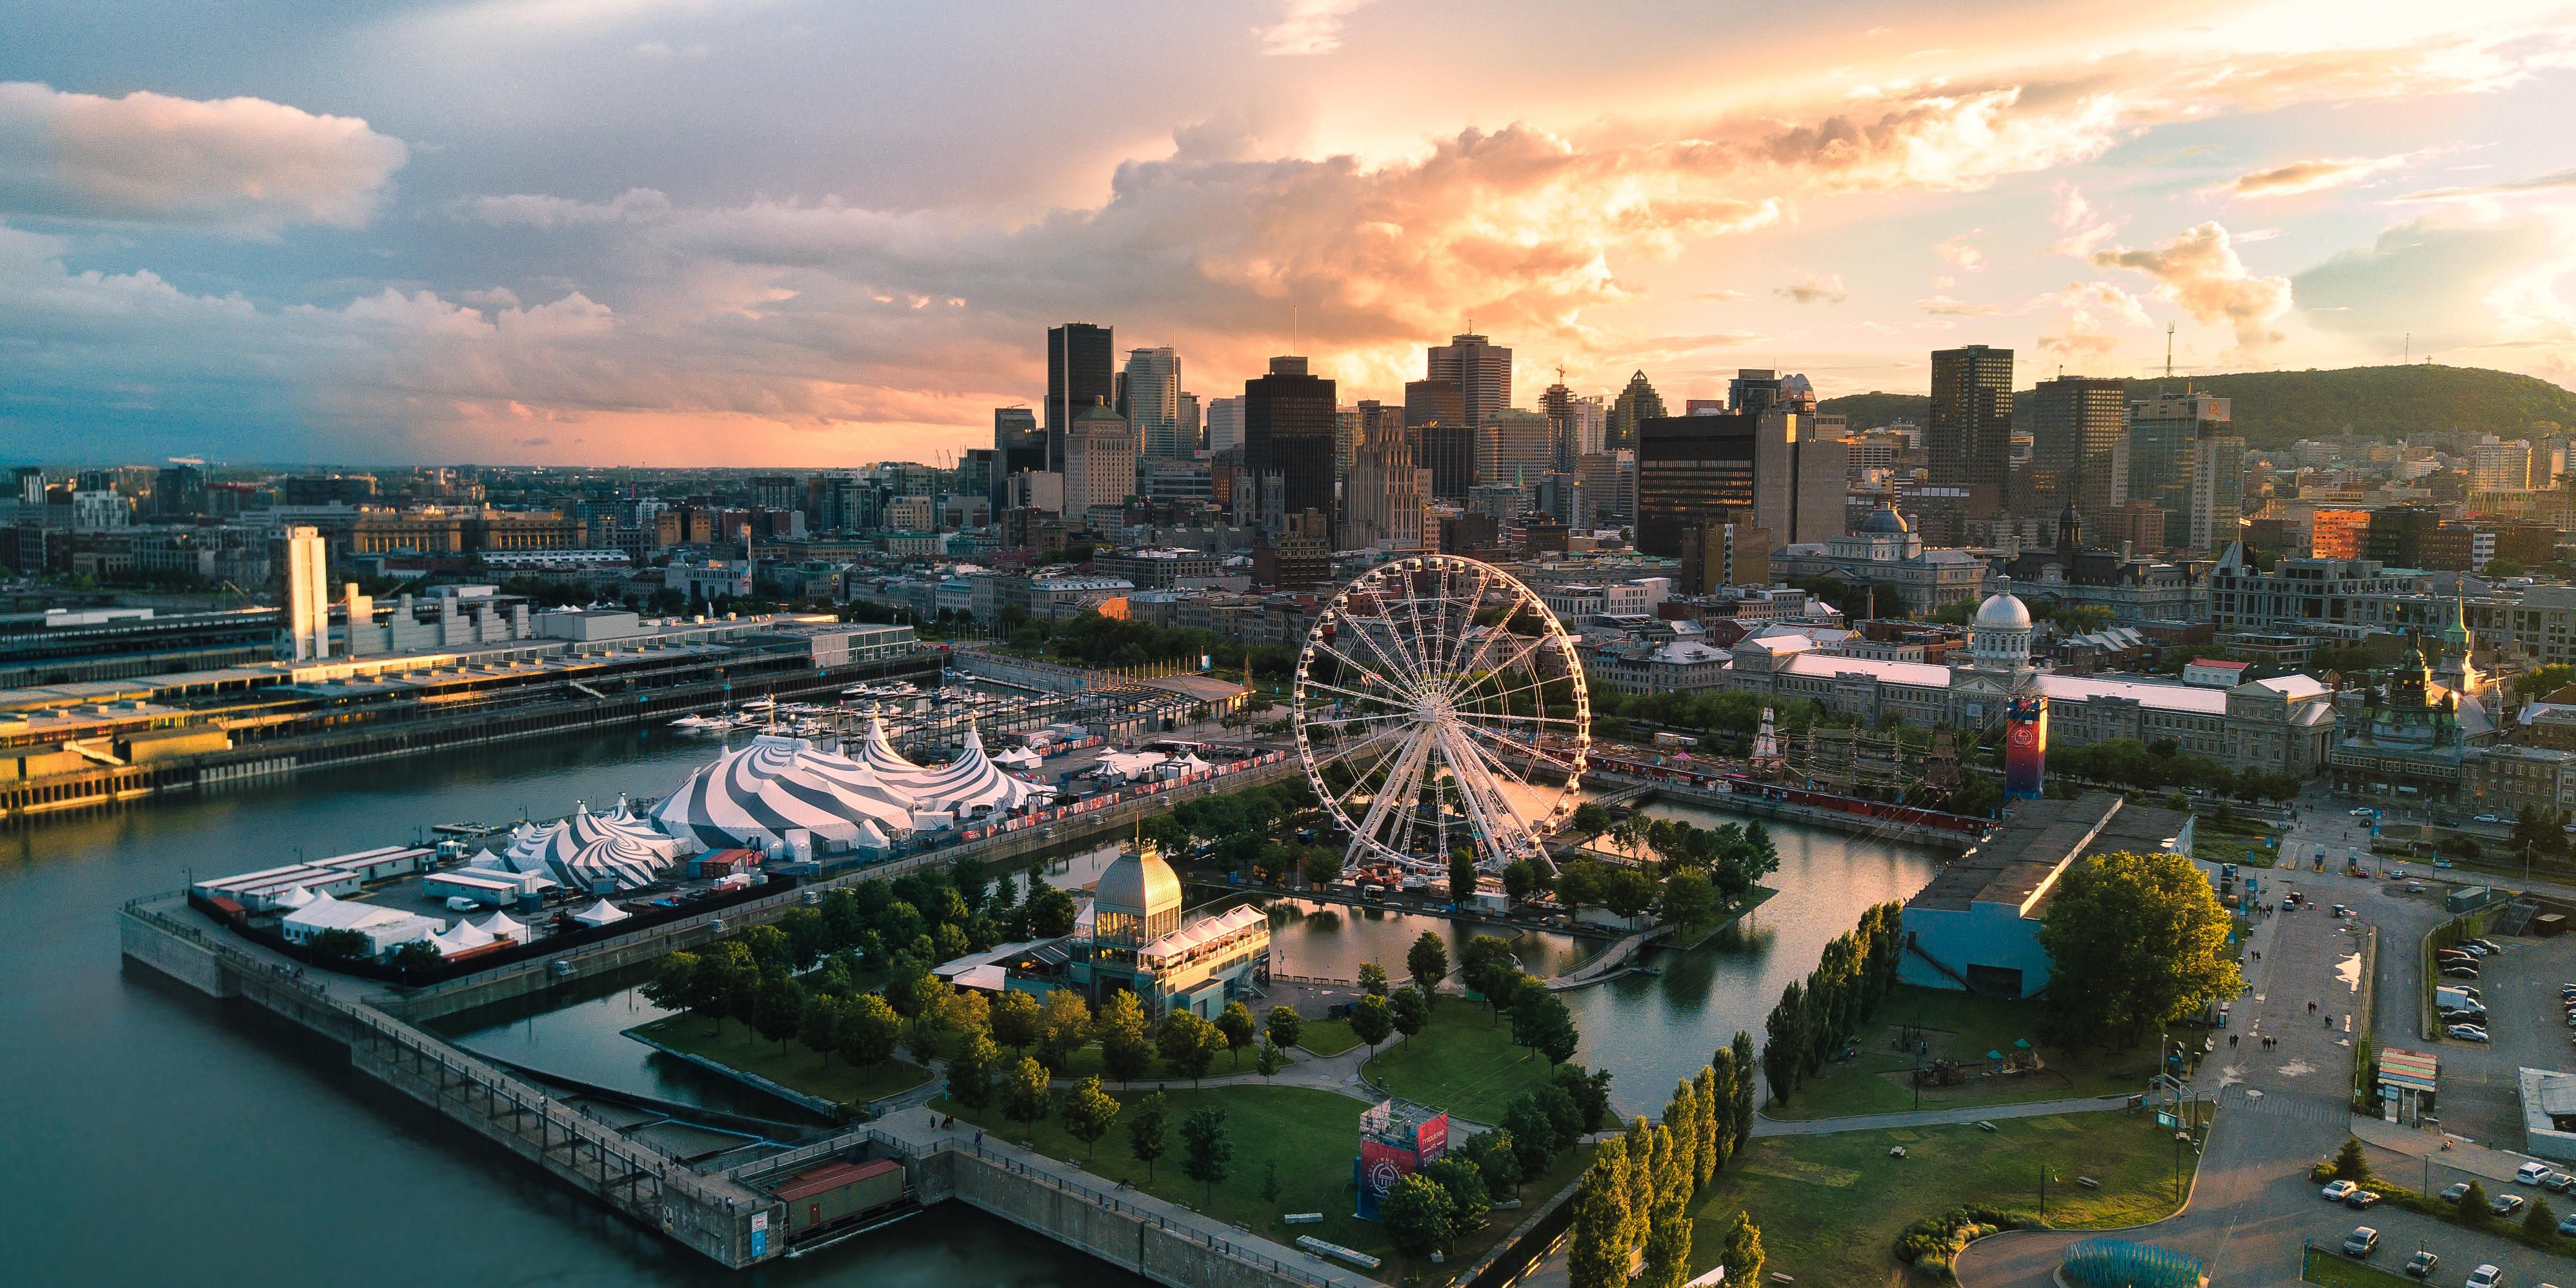 Our guide to Montreal includes a curated list of our favorite destinations in Montreal, with suggested itineraries and insider tips. Take a look and plan your perfect trip.